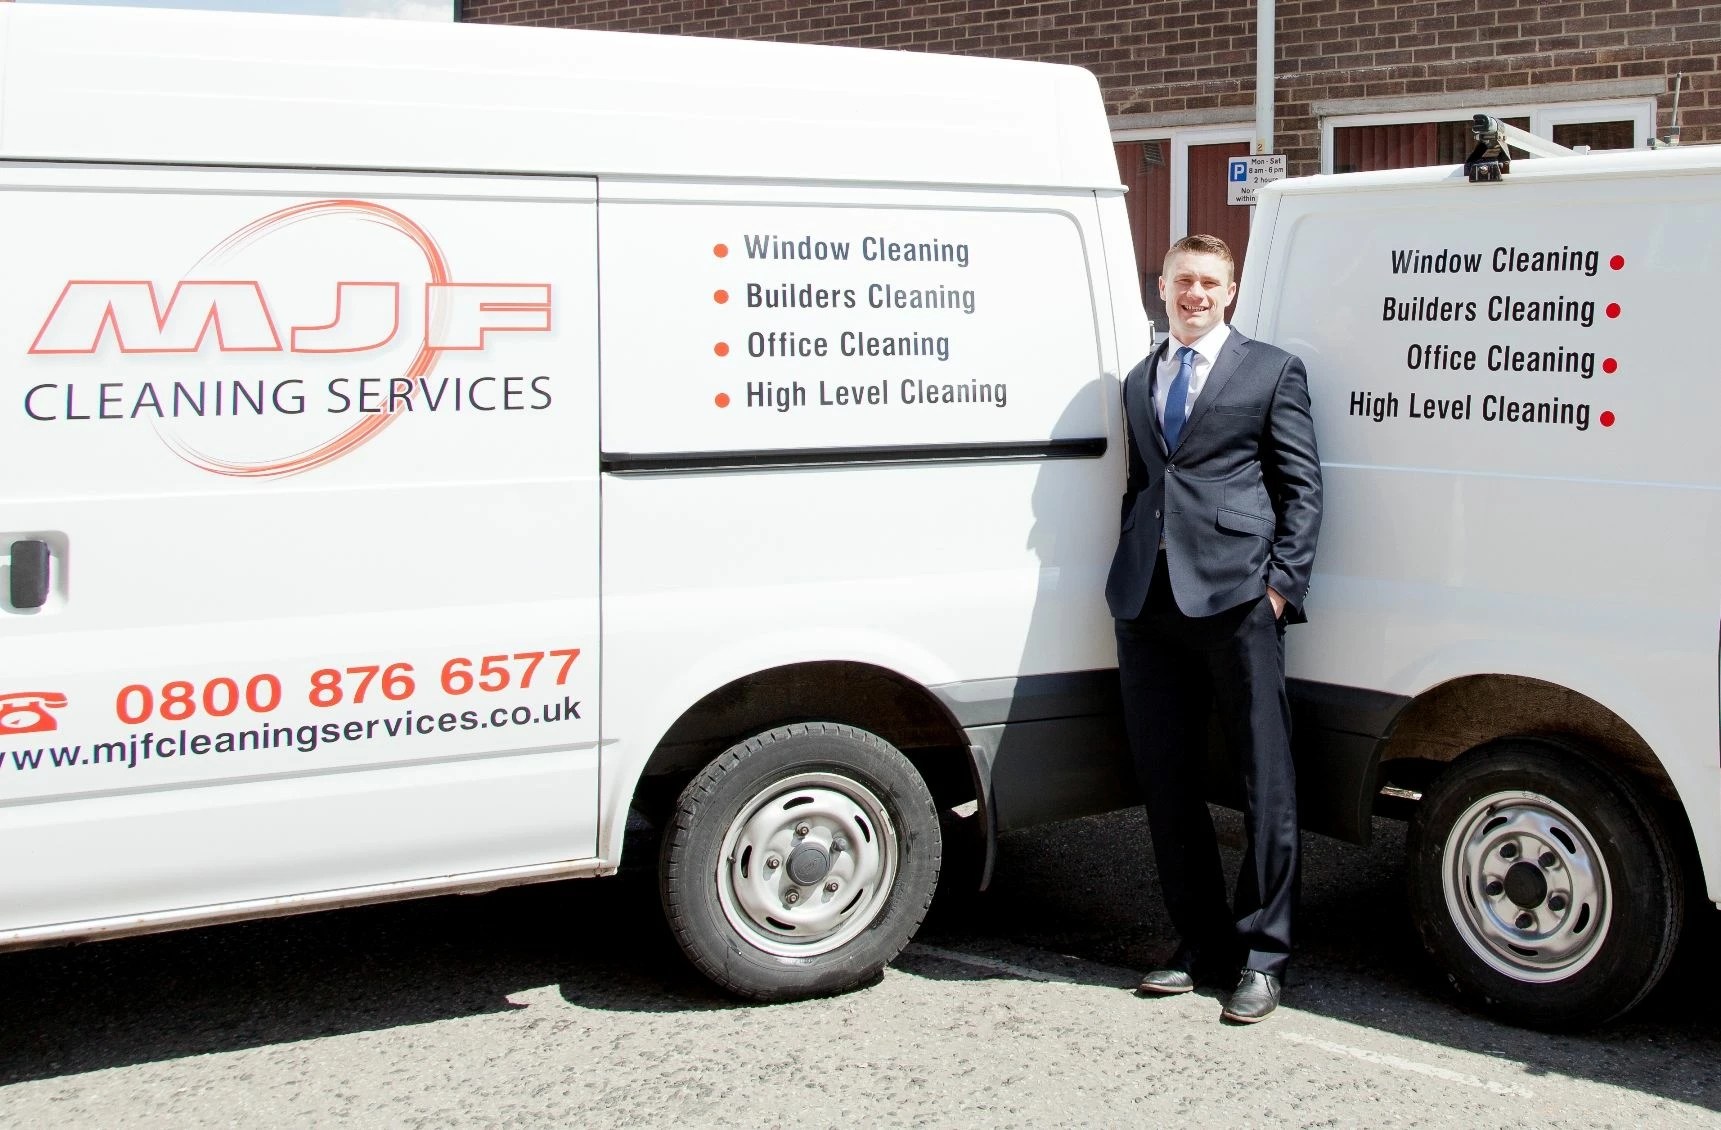 Martin Ferguson, MD of MJF Cleaning Services